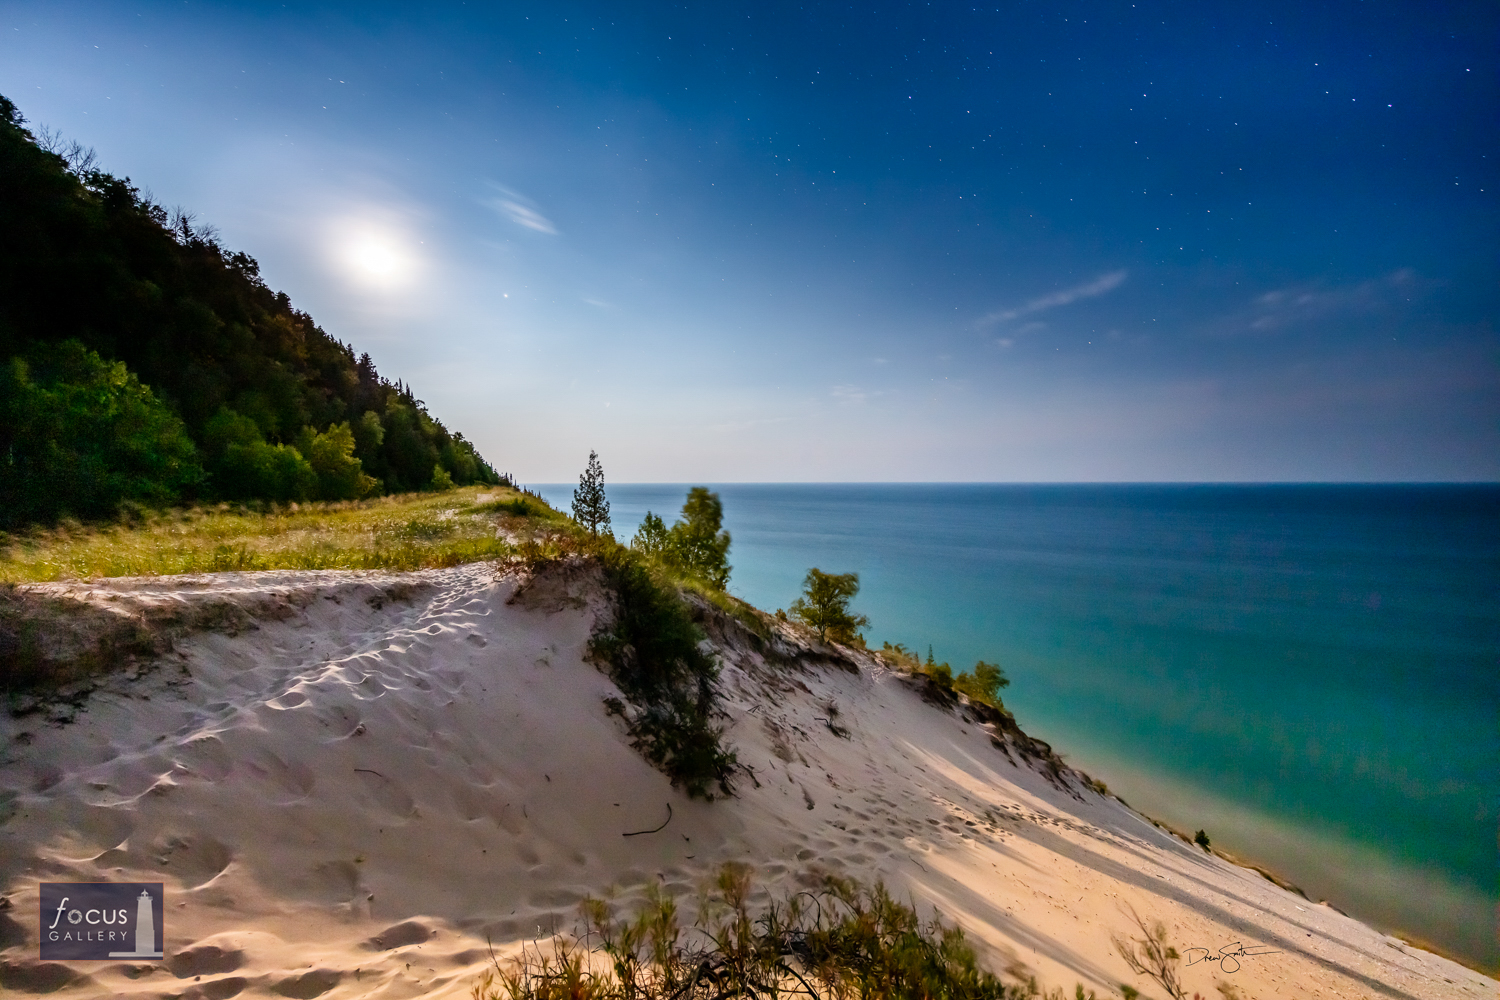 Photo © Drew Smith Moonshine on the sand at Old Baldy and a sky full of stars - a perfect night for a walk in the dunes. This...